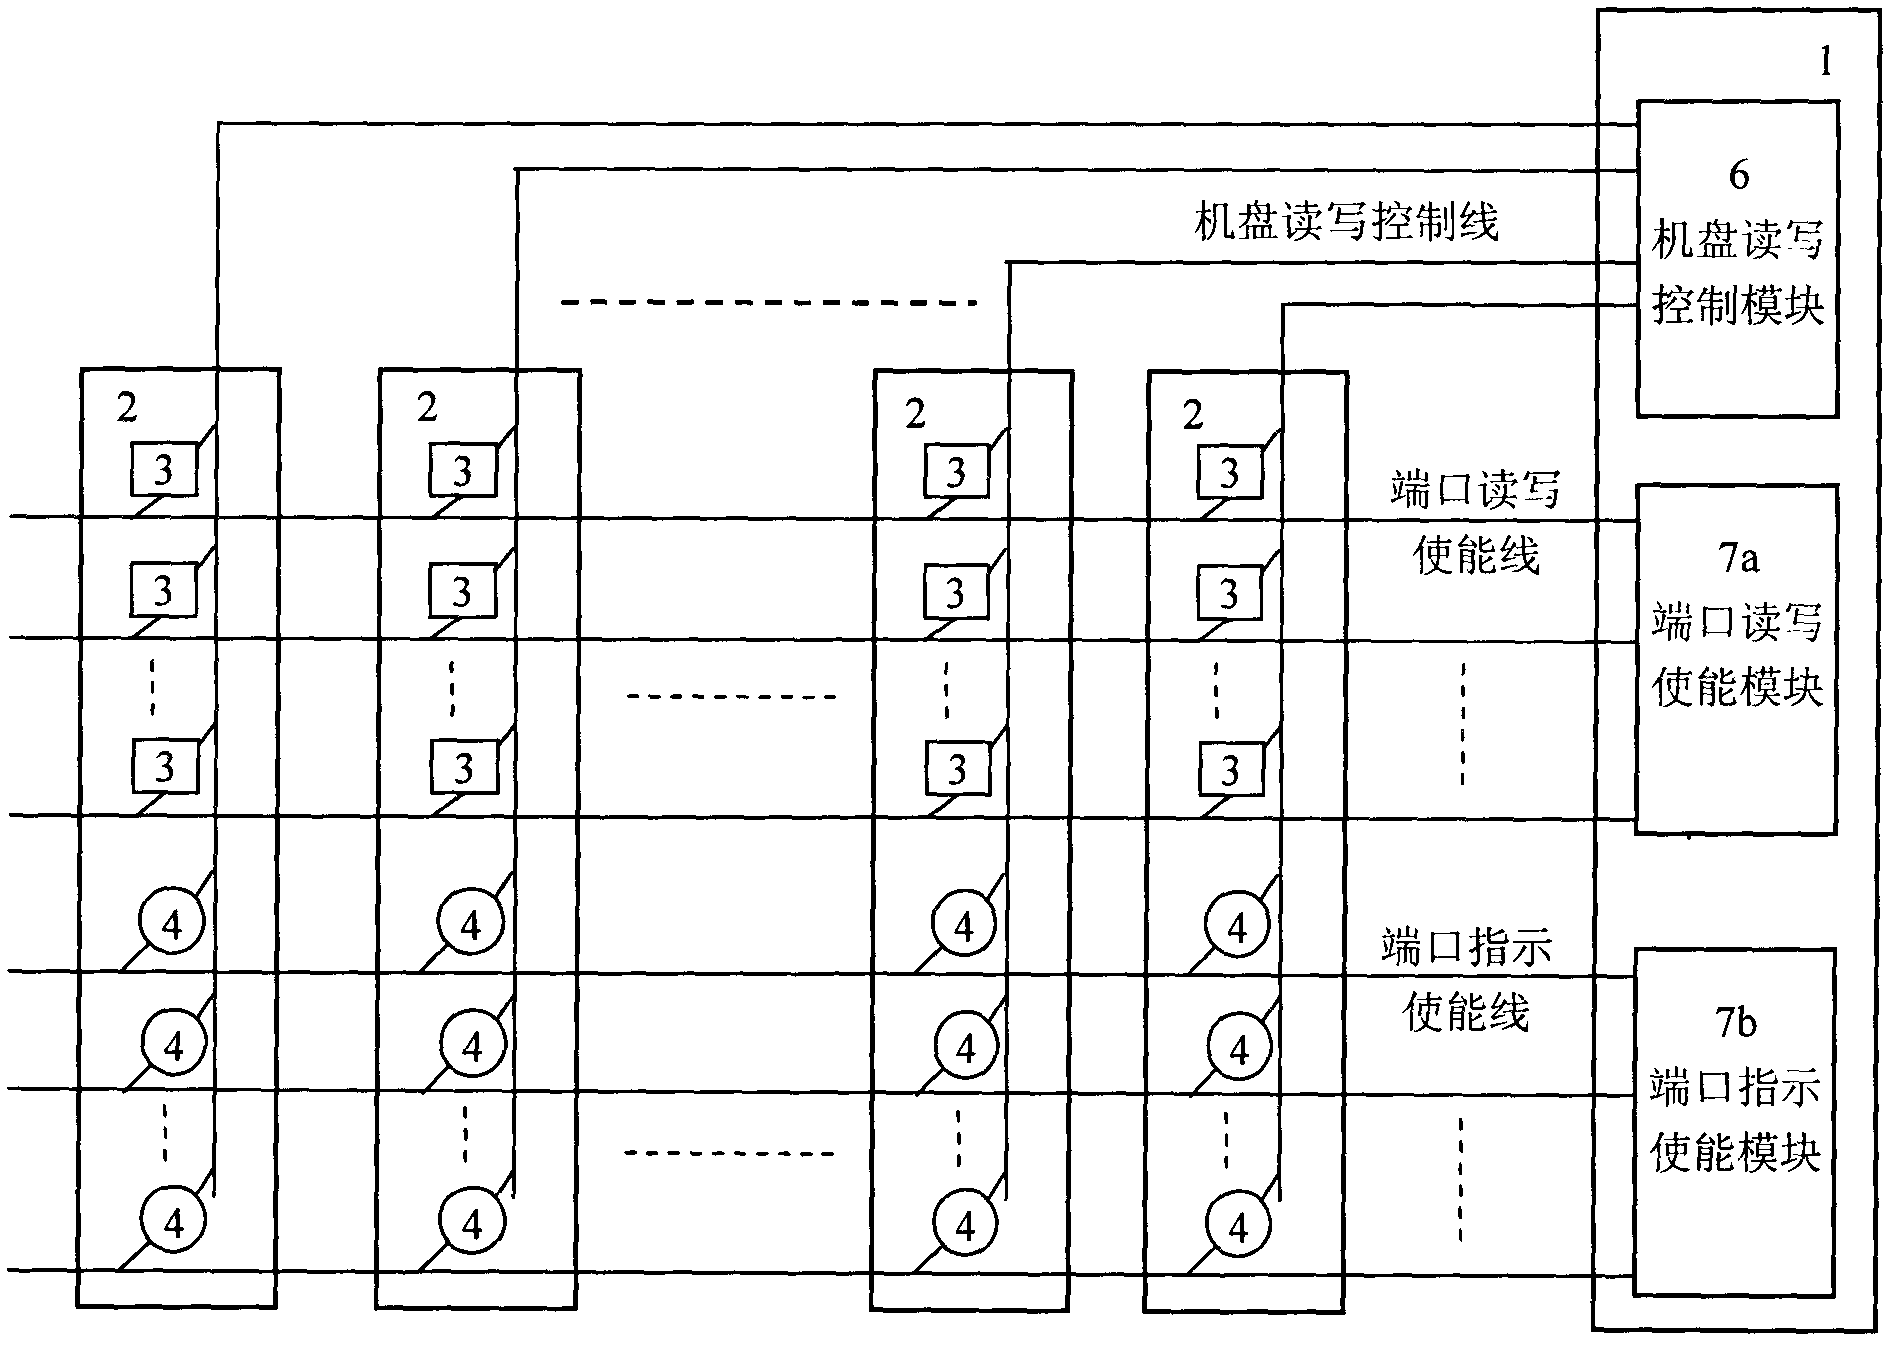 Circuit for realizing passivity of intelligent photo wiring interface plate in port enabling way